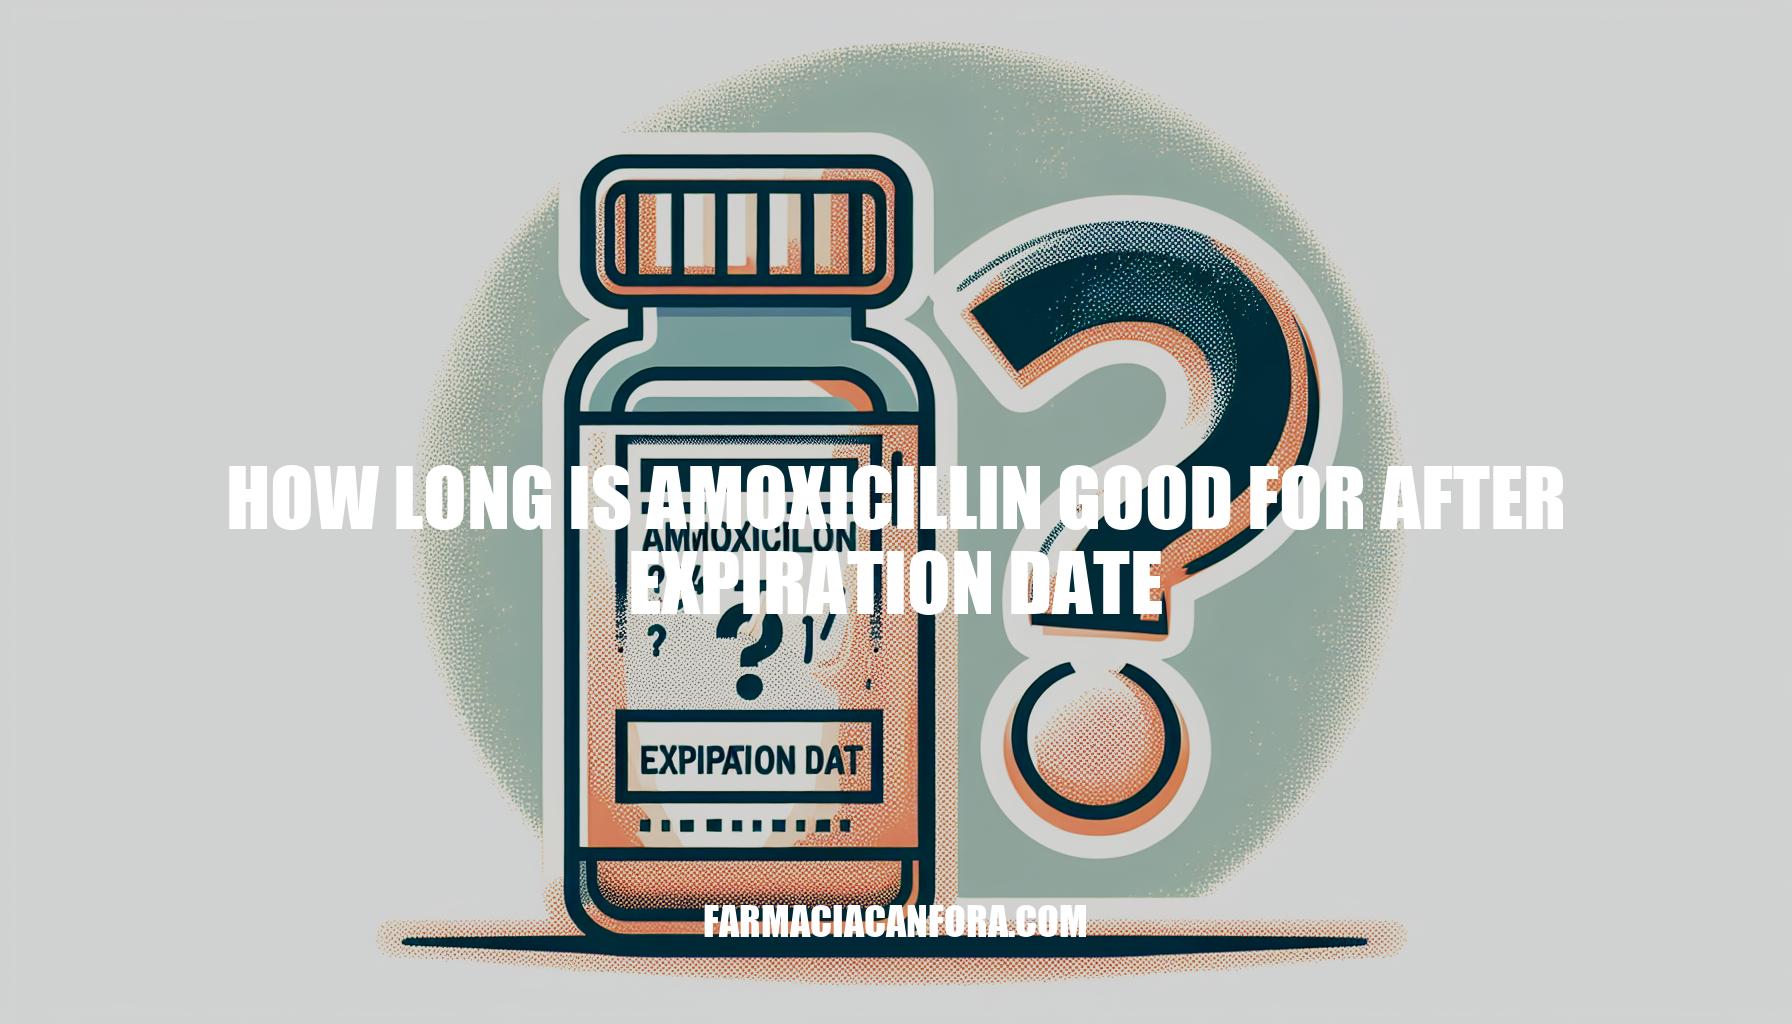 How Long is Amoxicillin Good for After Expiration Date